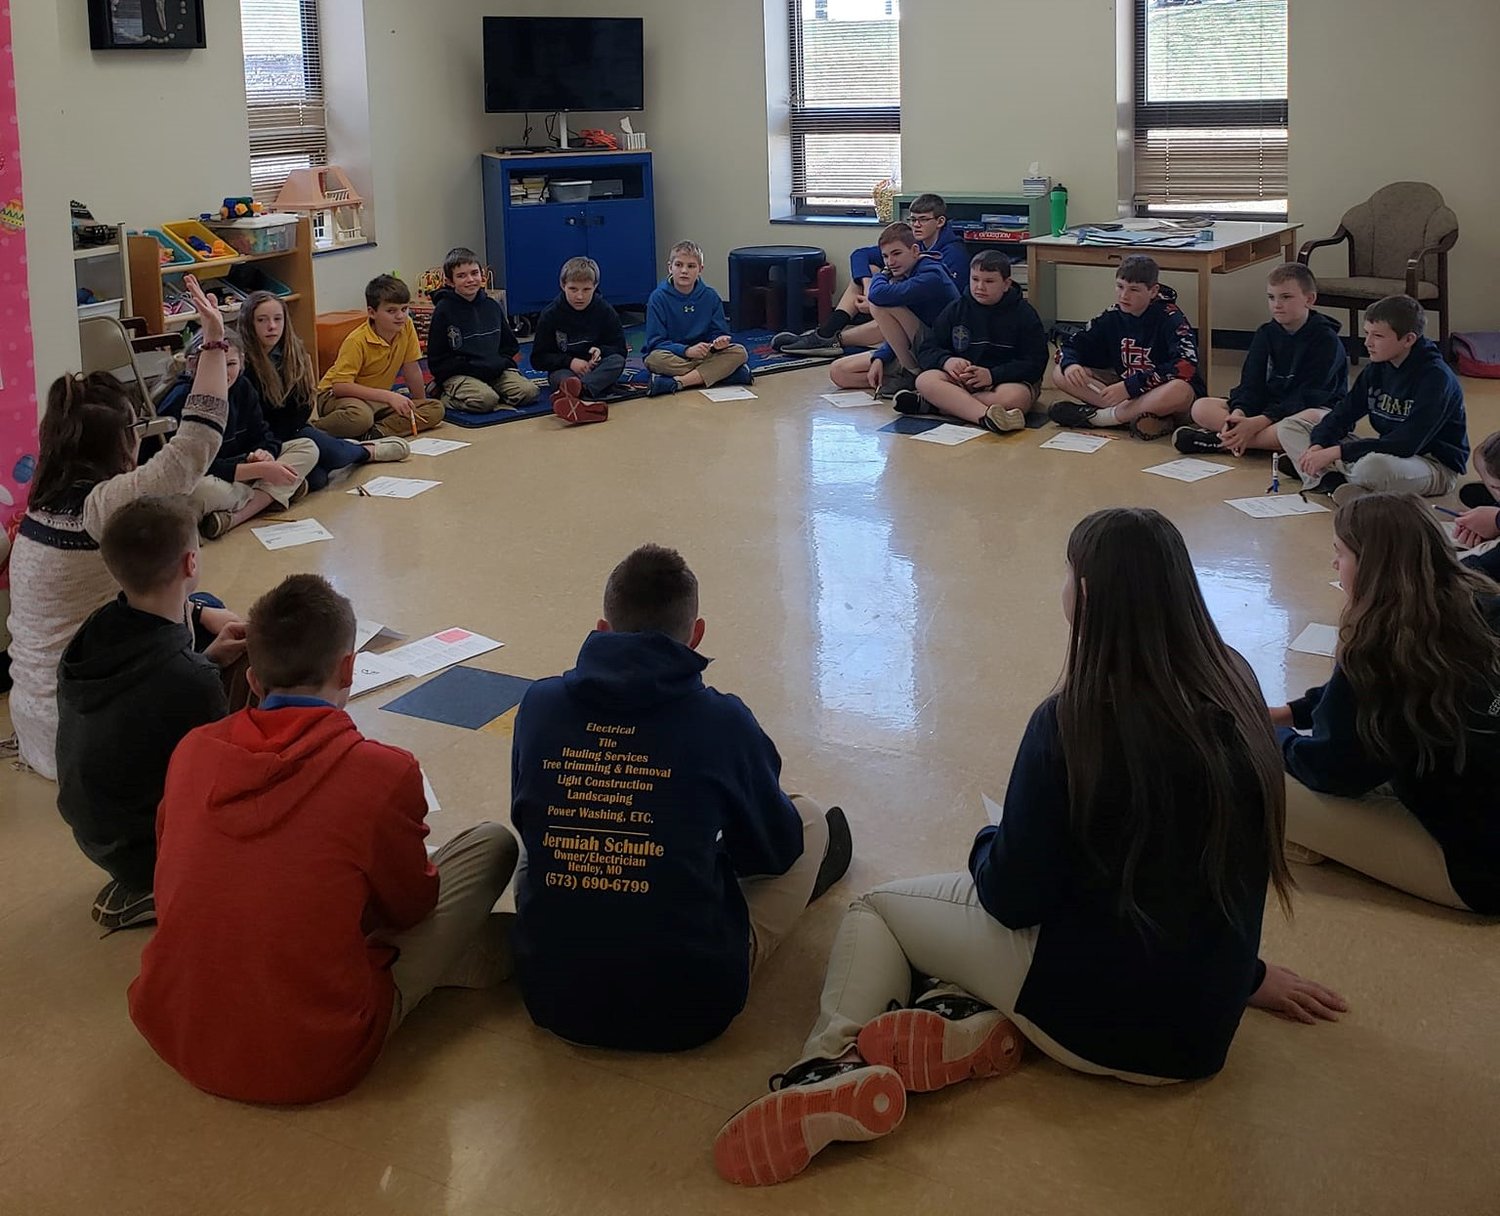 Dala Hemeyer, Director of Counseling Services for Catholic Charities of Central and Northern Missouri, teaches a lesson from the “Mission Secret Saints” curriculum at Our Lady of the Snows School in Mary’s Home in March.